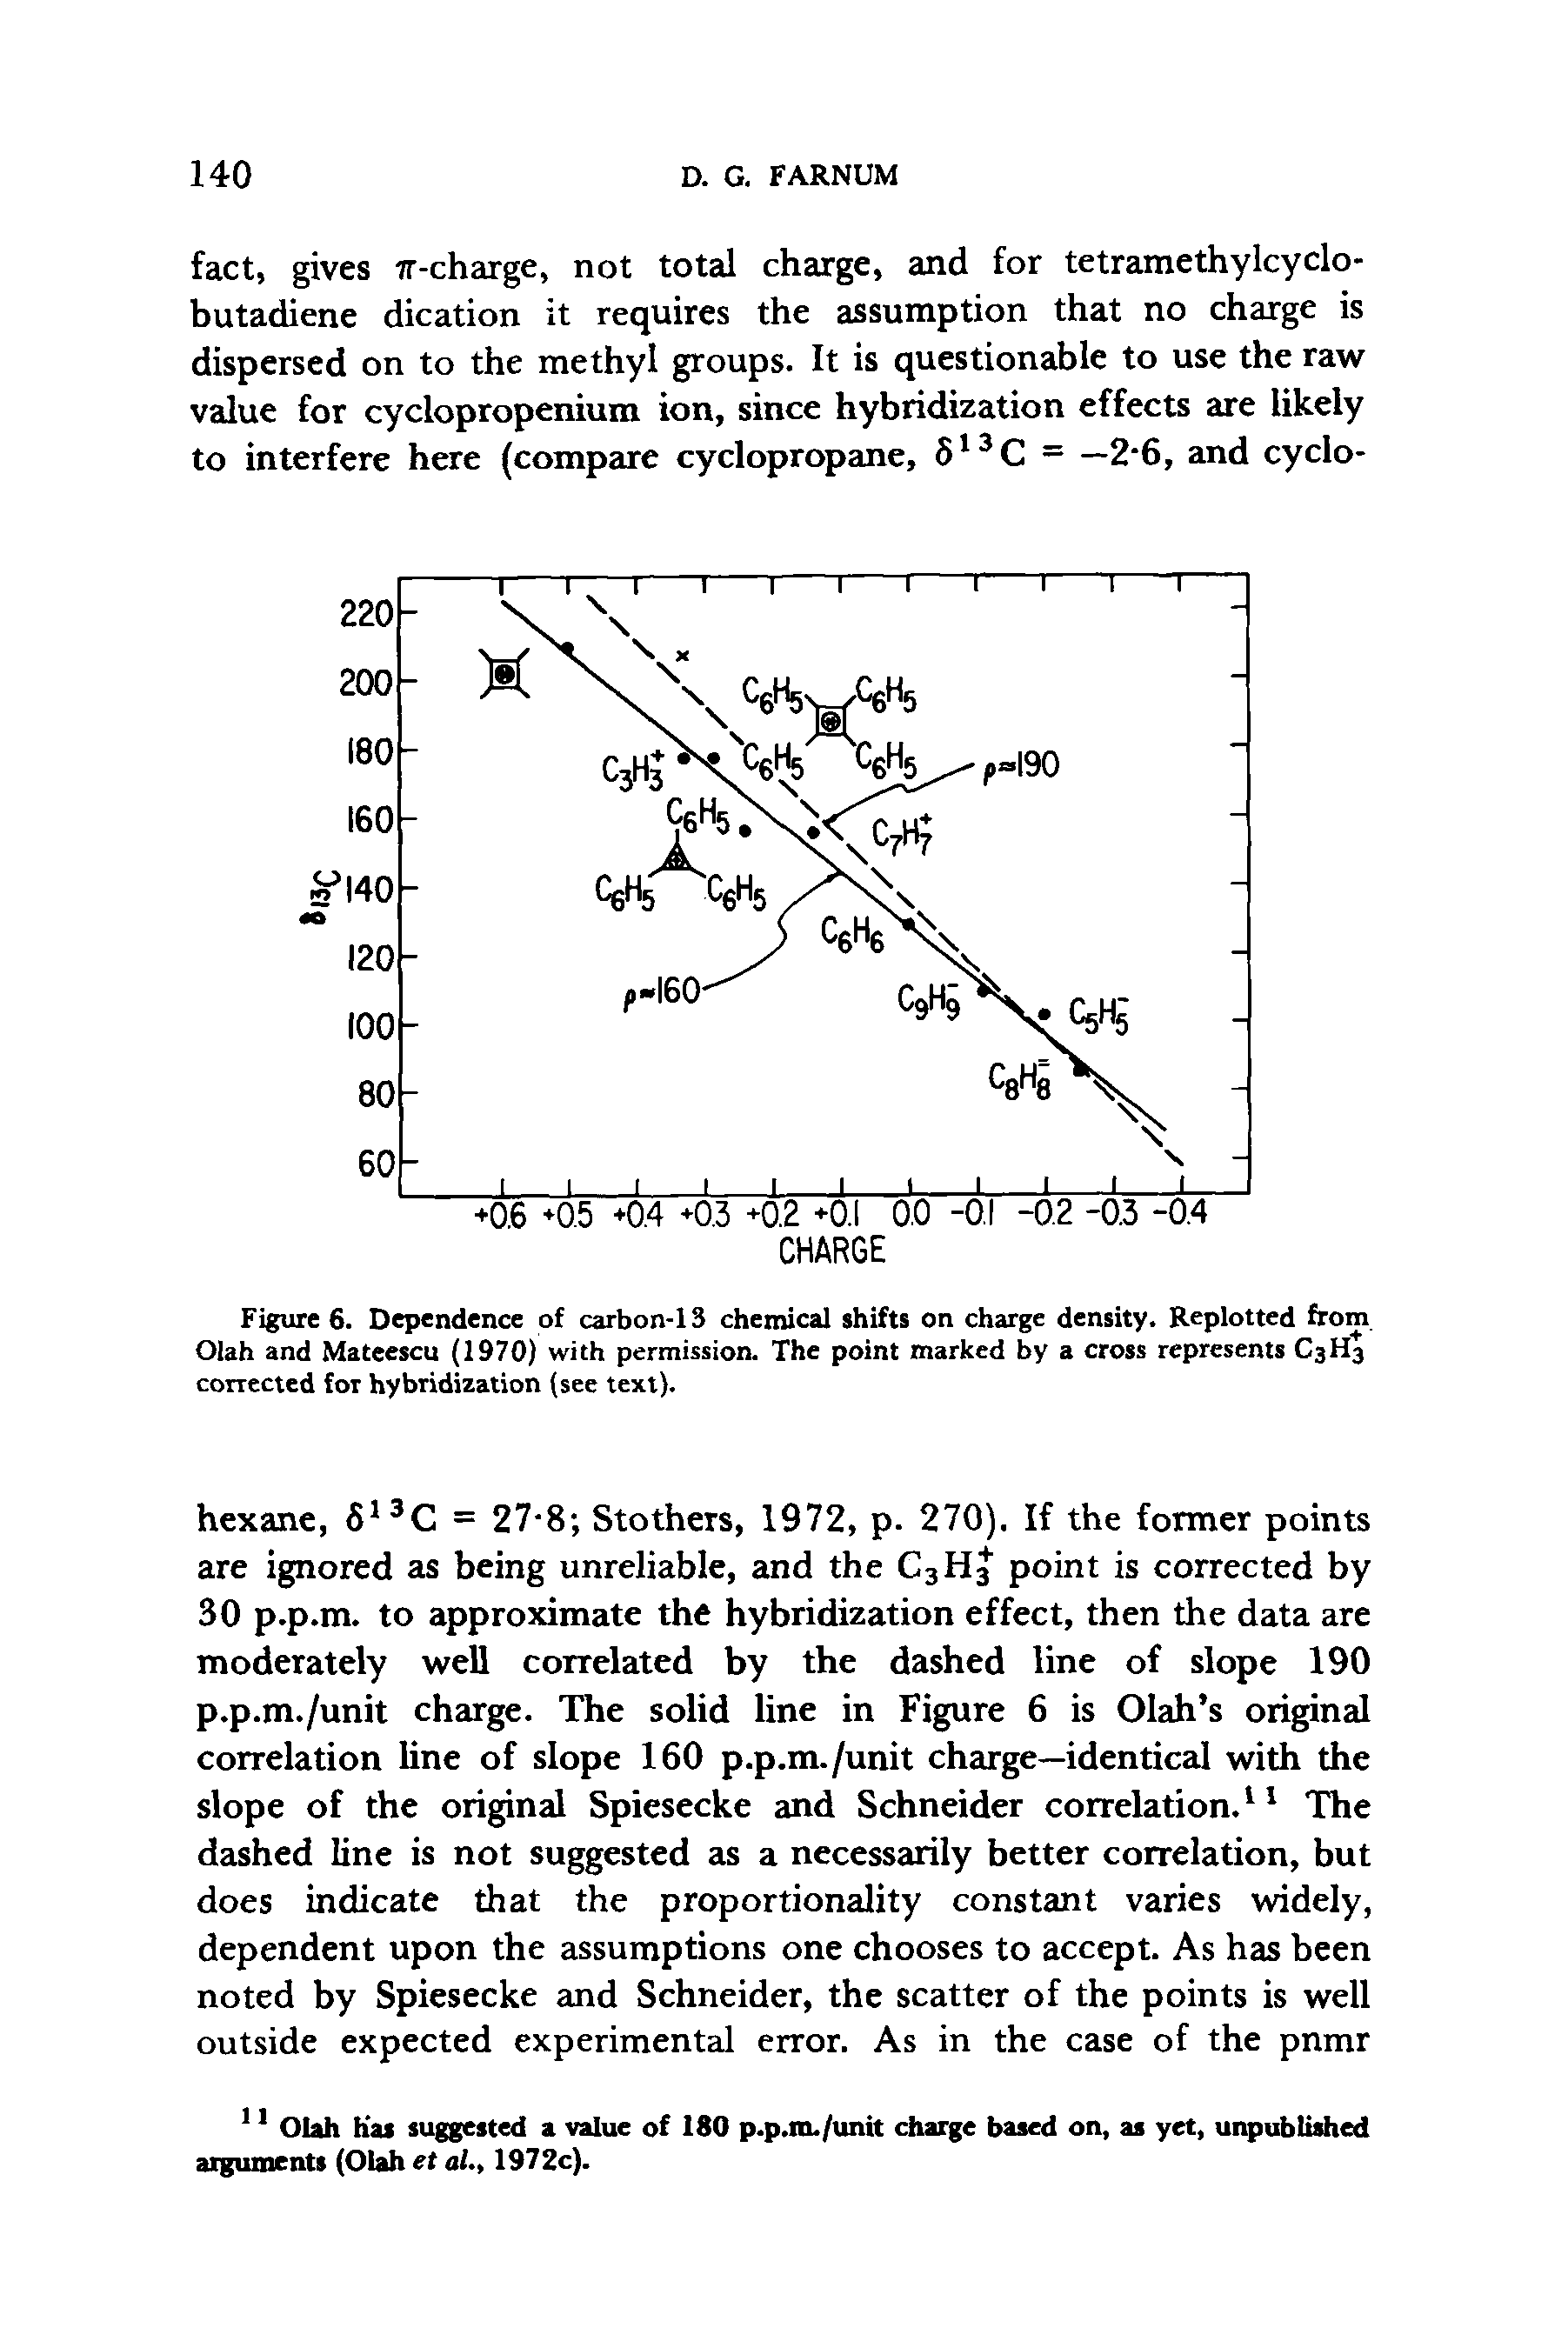 Figure 6. Dependence of carbon-13 chemical shifts on charge density. Replotted from Olah and Mateescu (1970) with permission. The point marked by a cross represents C3H3 corrected for hybridization (see text).